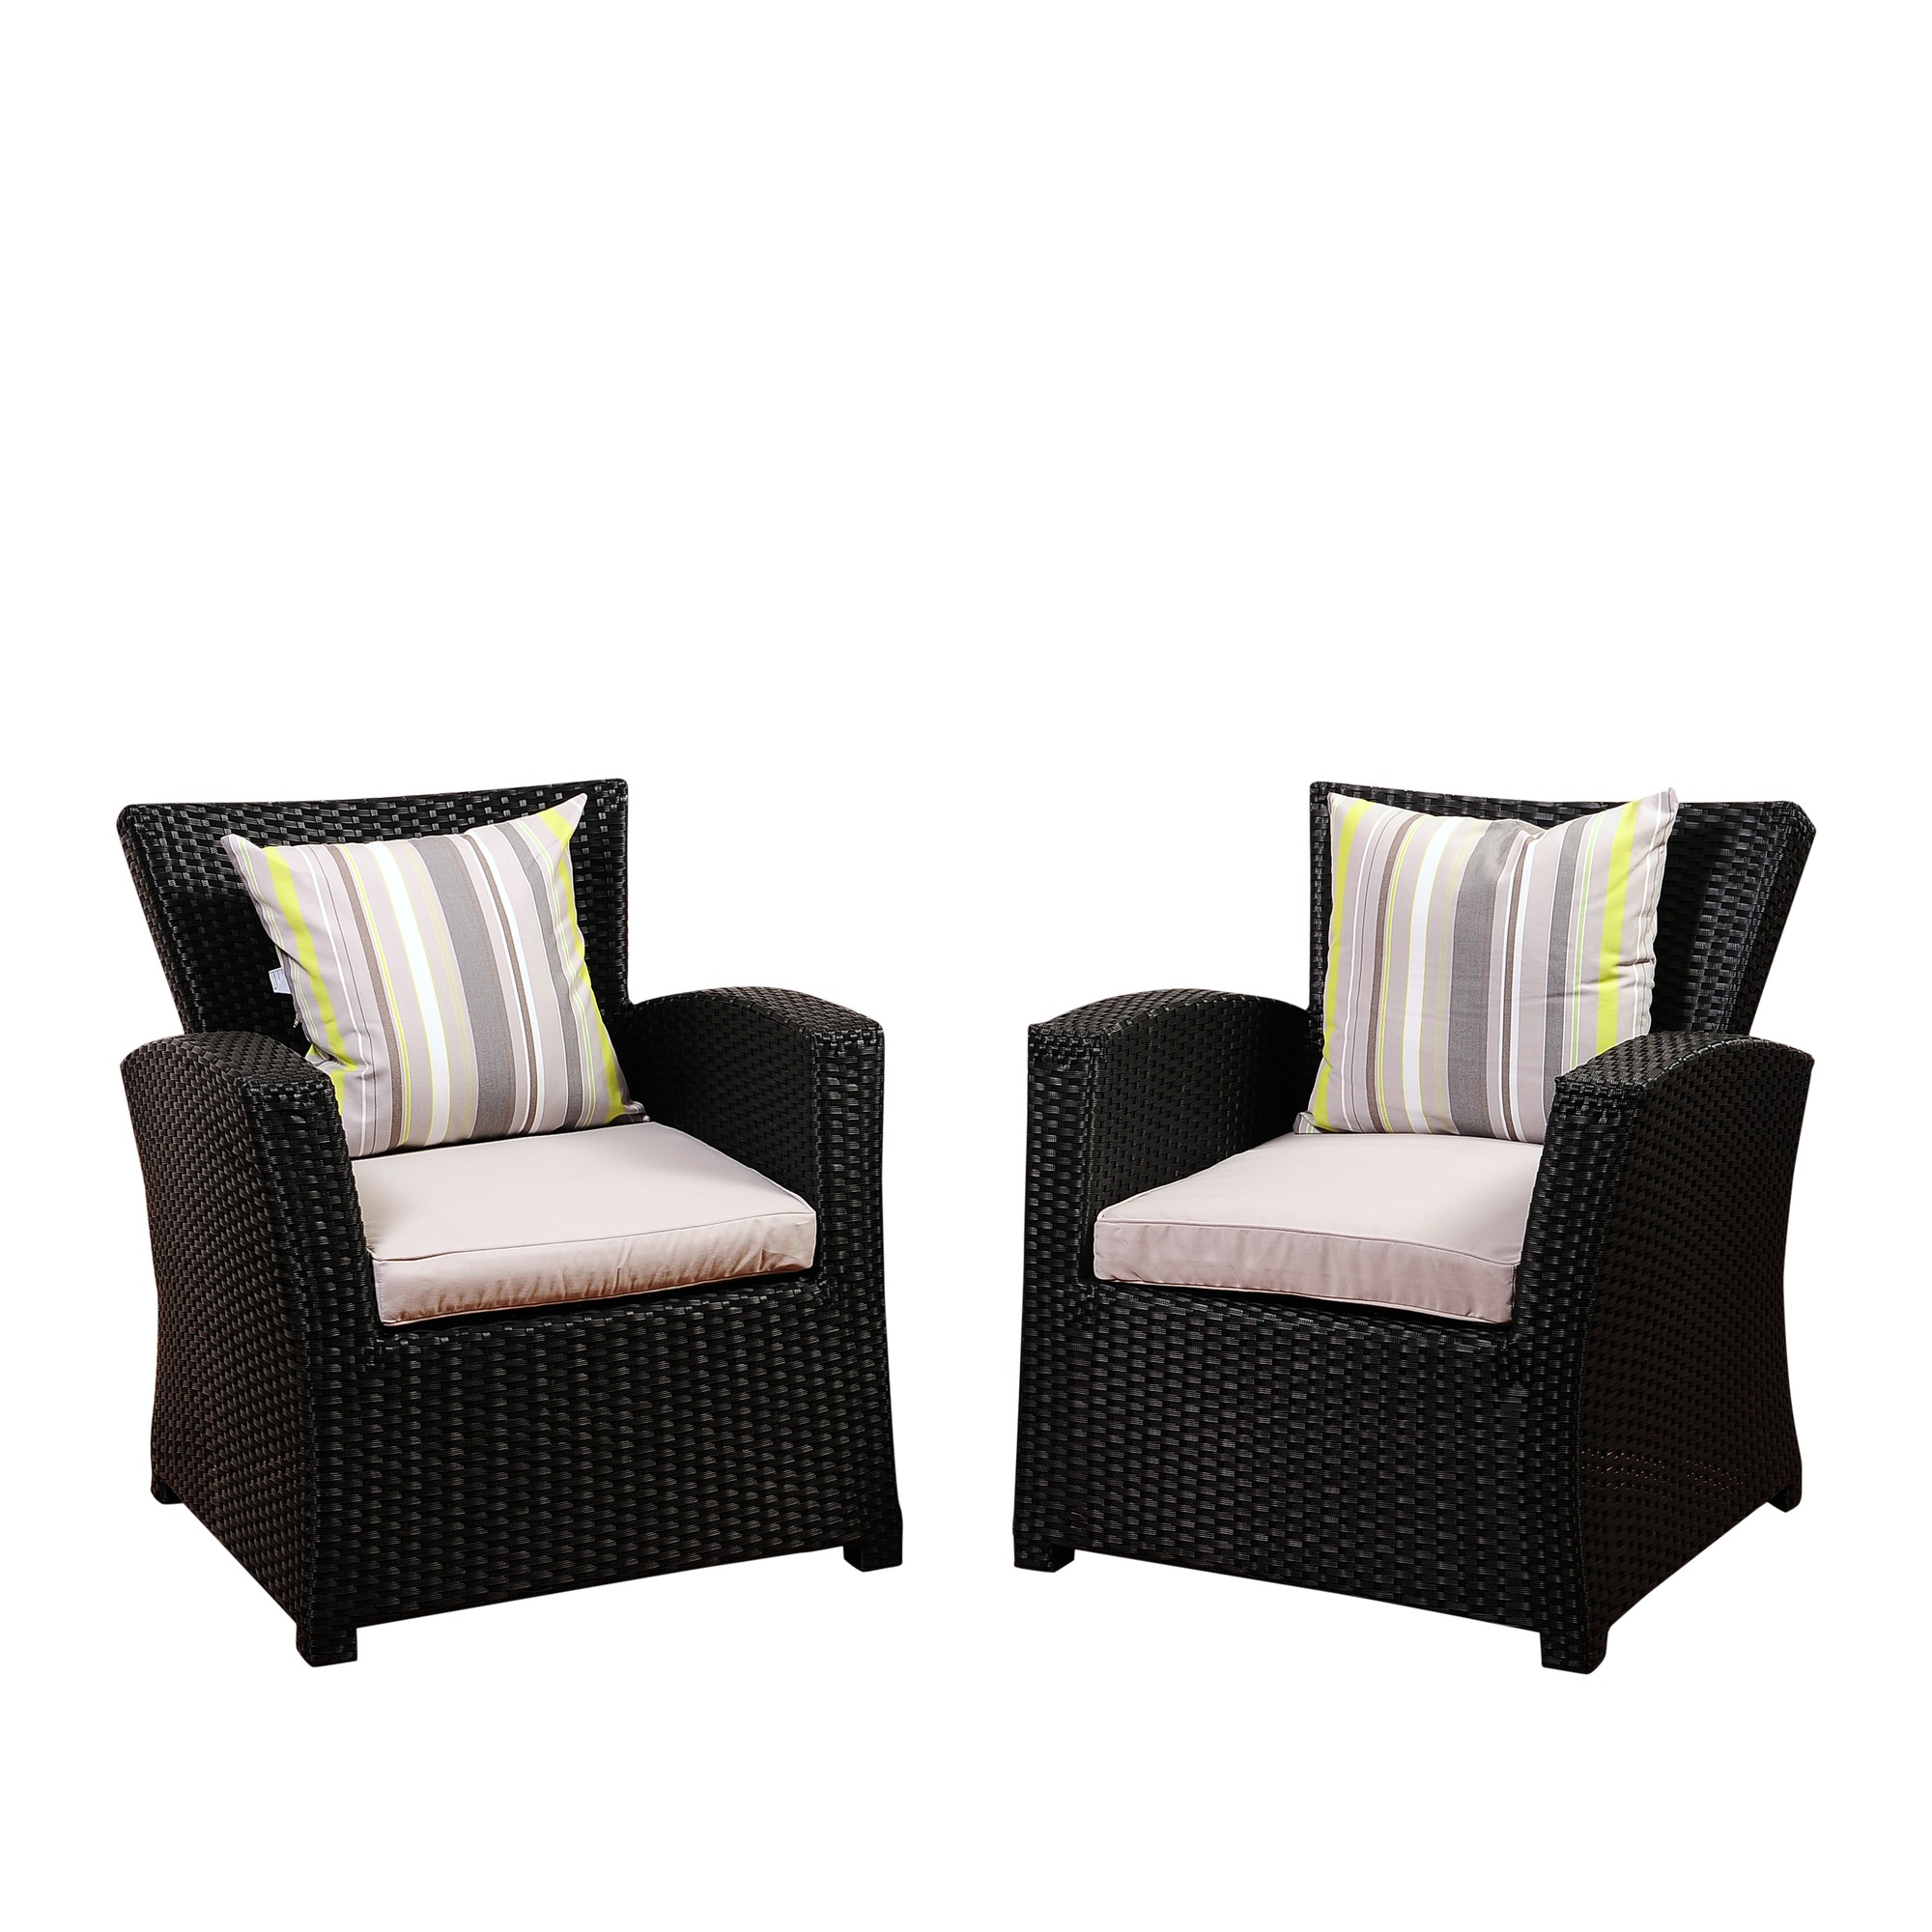 Outdoor Living and Style 2-Piece Black Staffordshire Wicker Outdoor Patio Arm Chair Set 32" - Gray - image 1 of 5